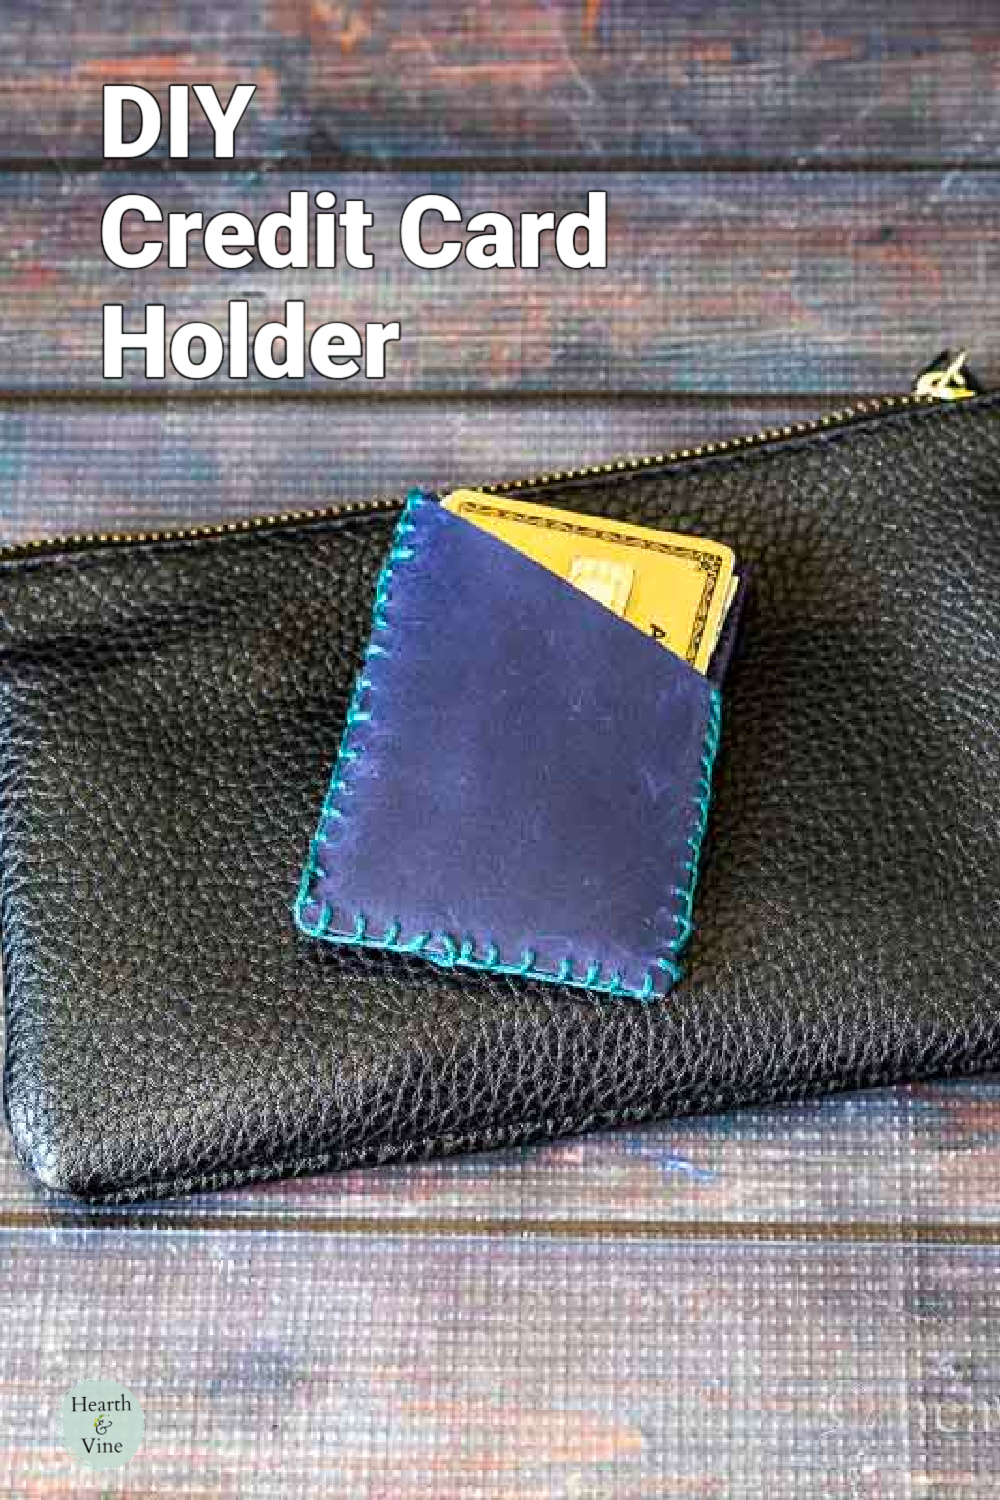 Small leather credit card holder on top of a black clutch.